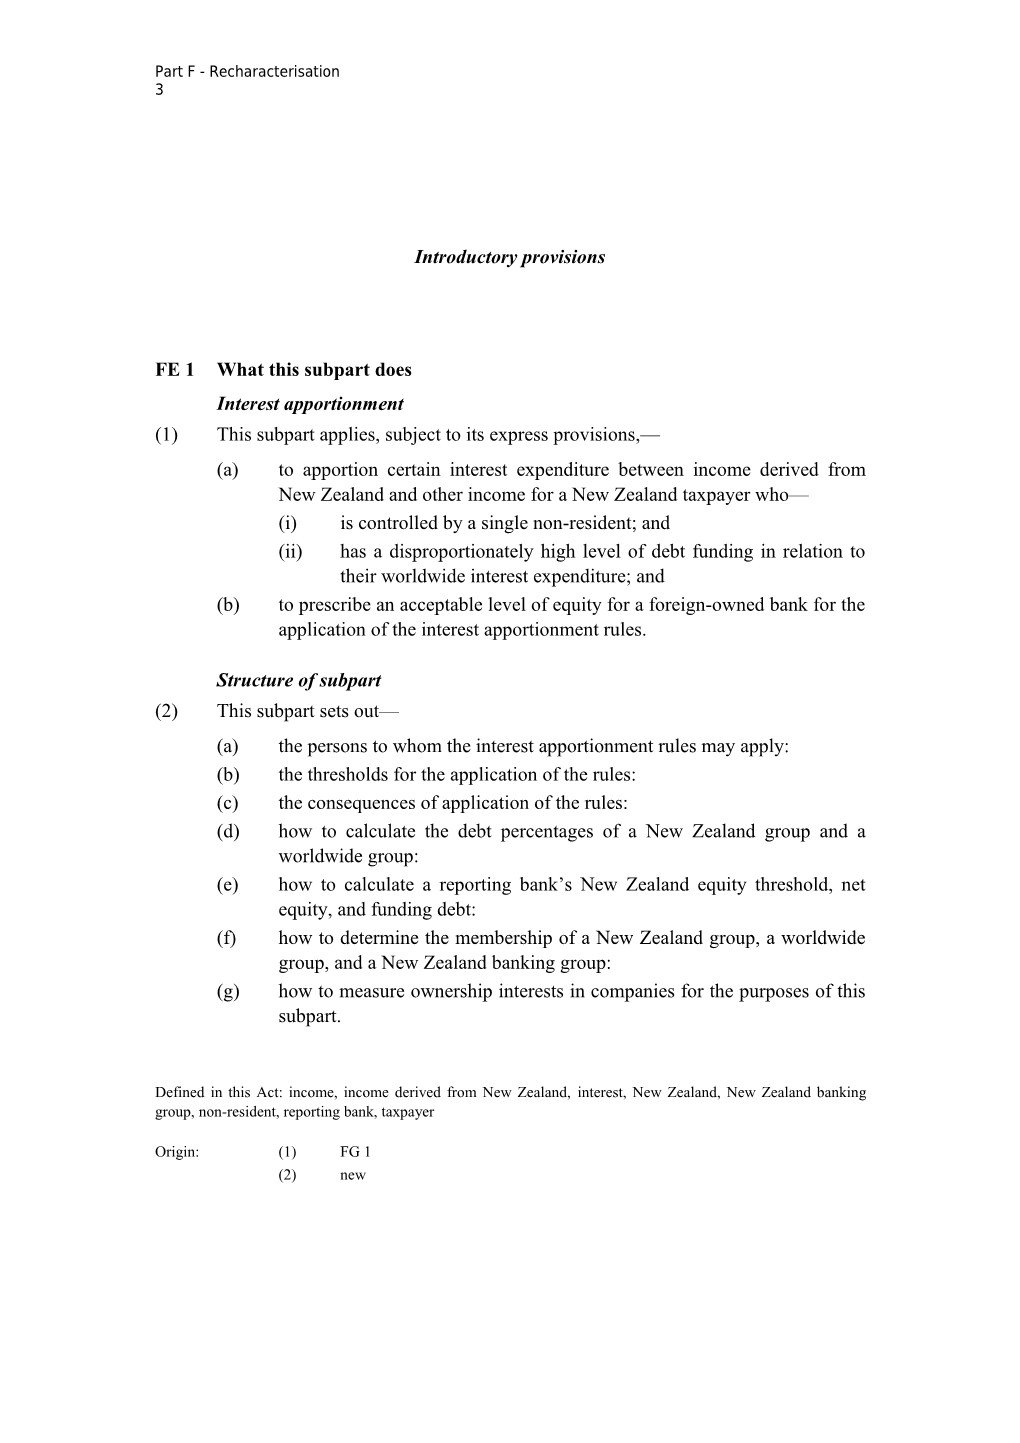 Rewriting the Income Tax Act - Exposure Draft - Part F Legislation 2